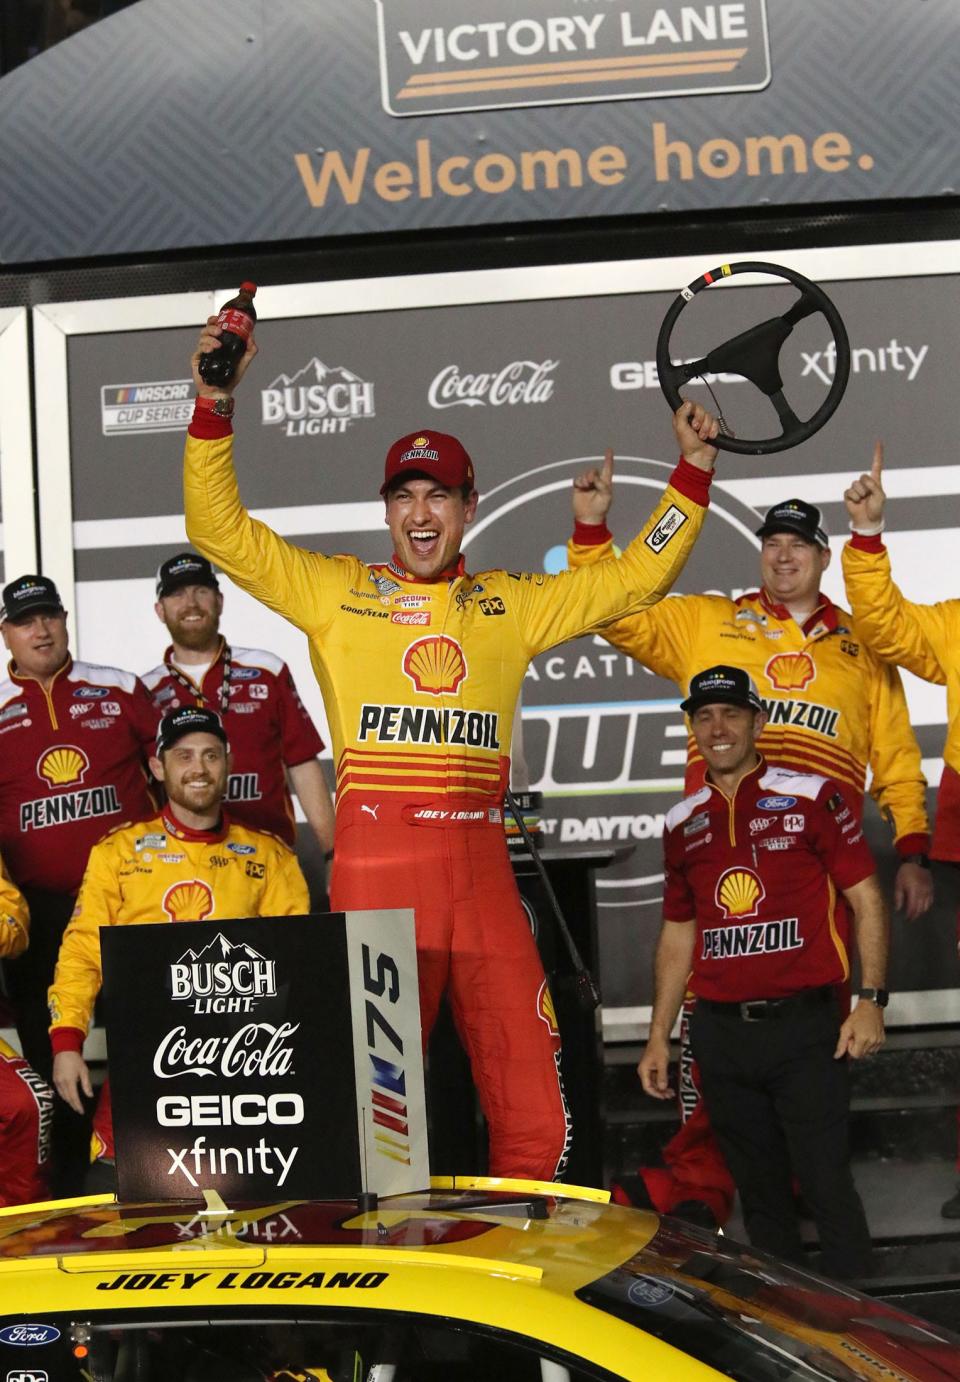 Joey Logano won one of the two BlueGreen Vacation Duel at Daytona races in 2023.